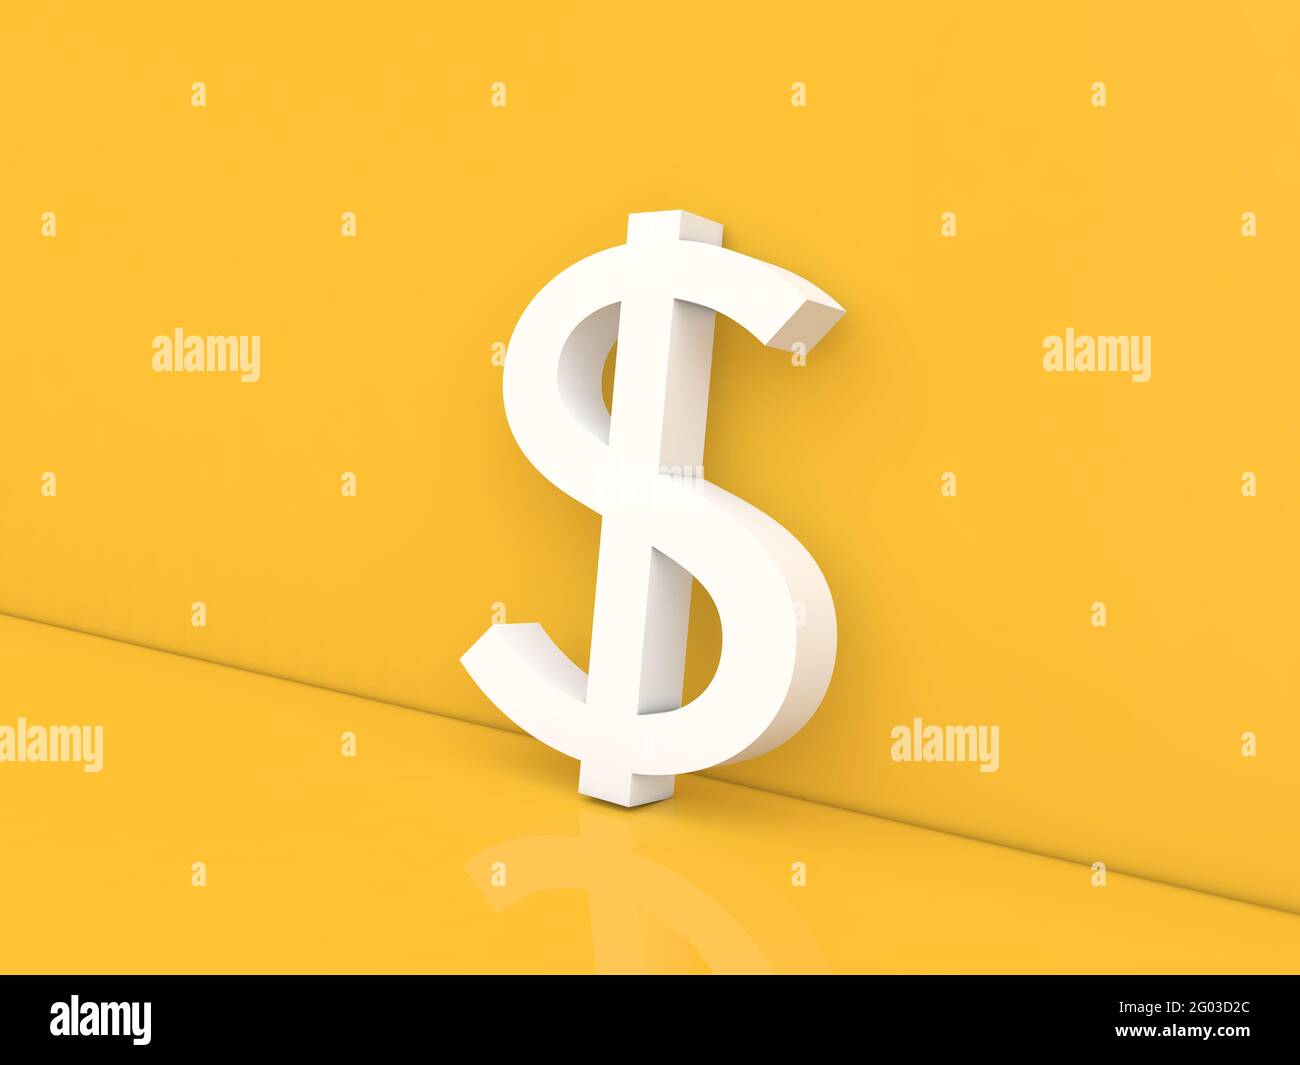 Dollar sign on a yellow background. 3d render illustration. Stock Photo